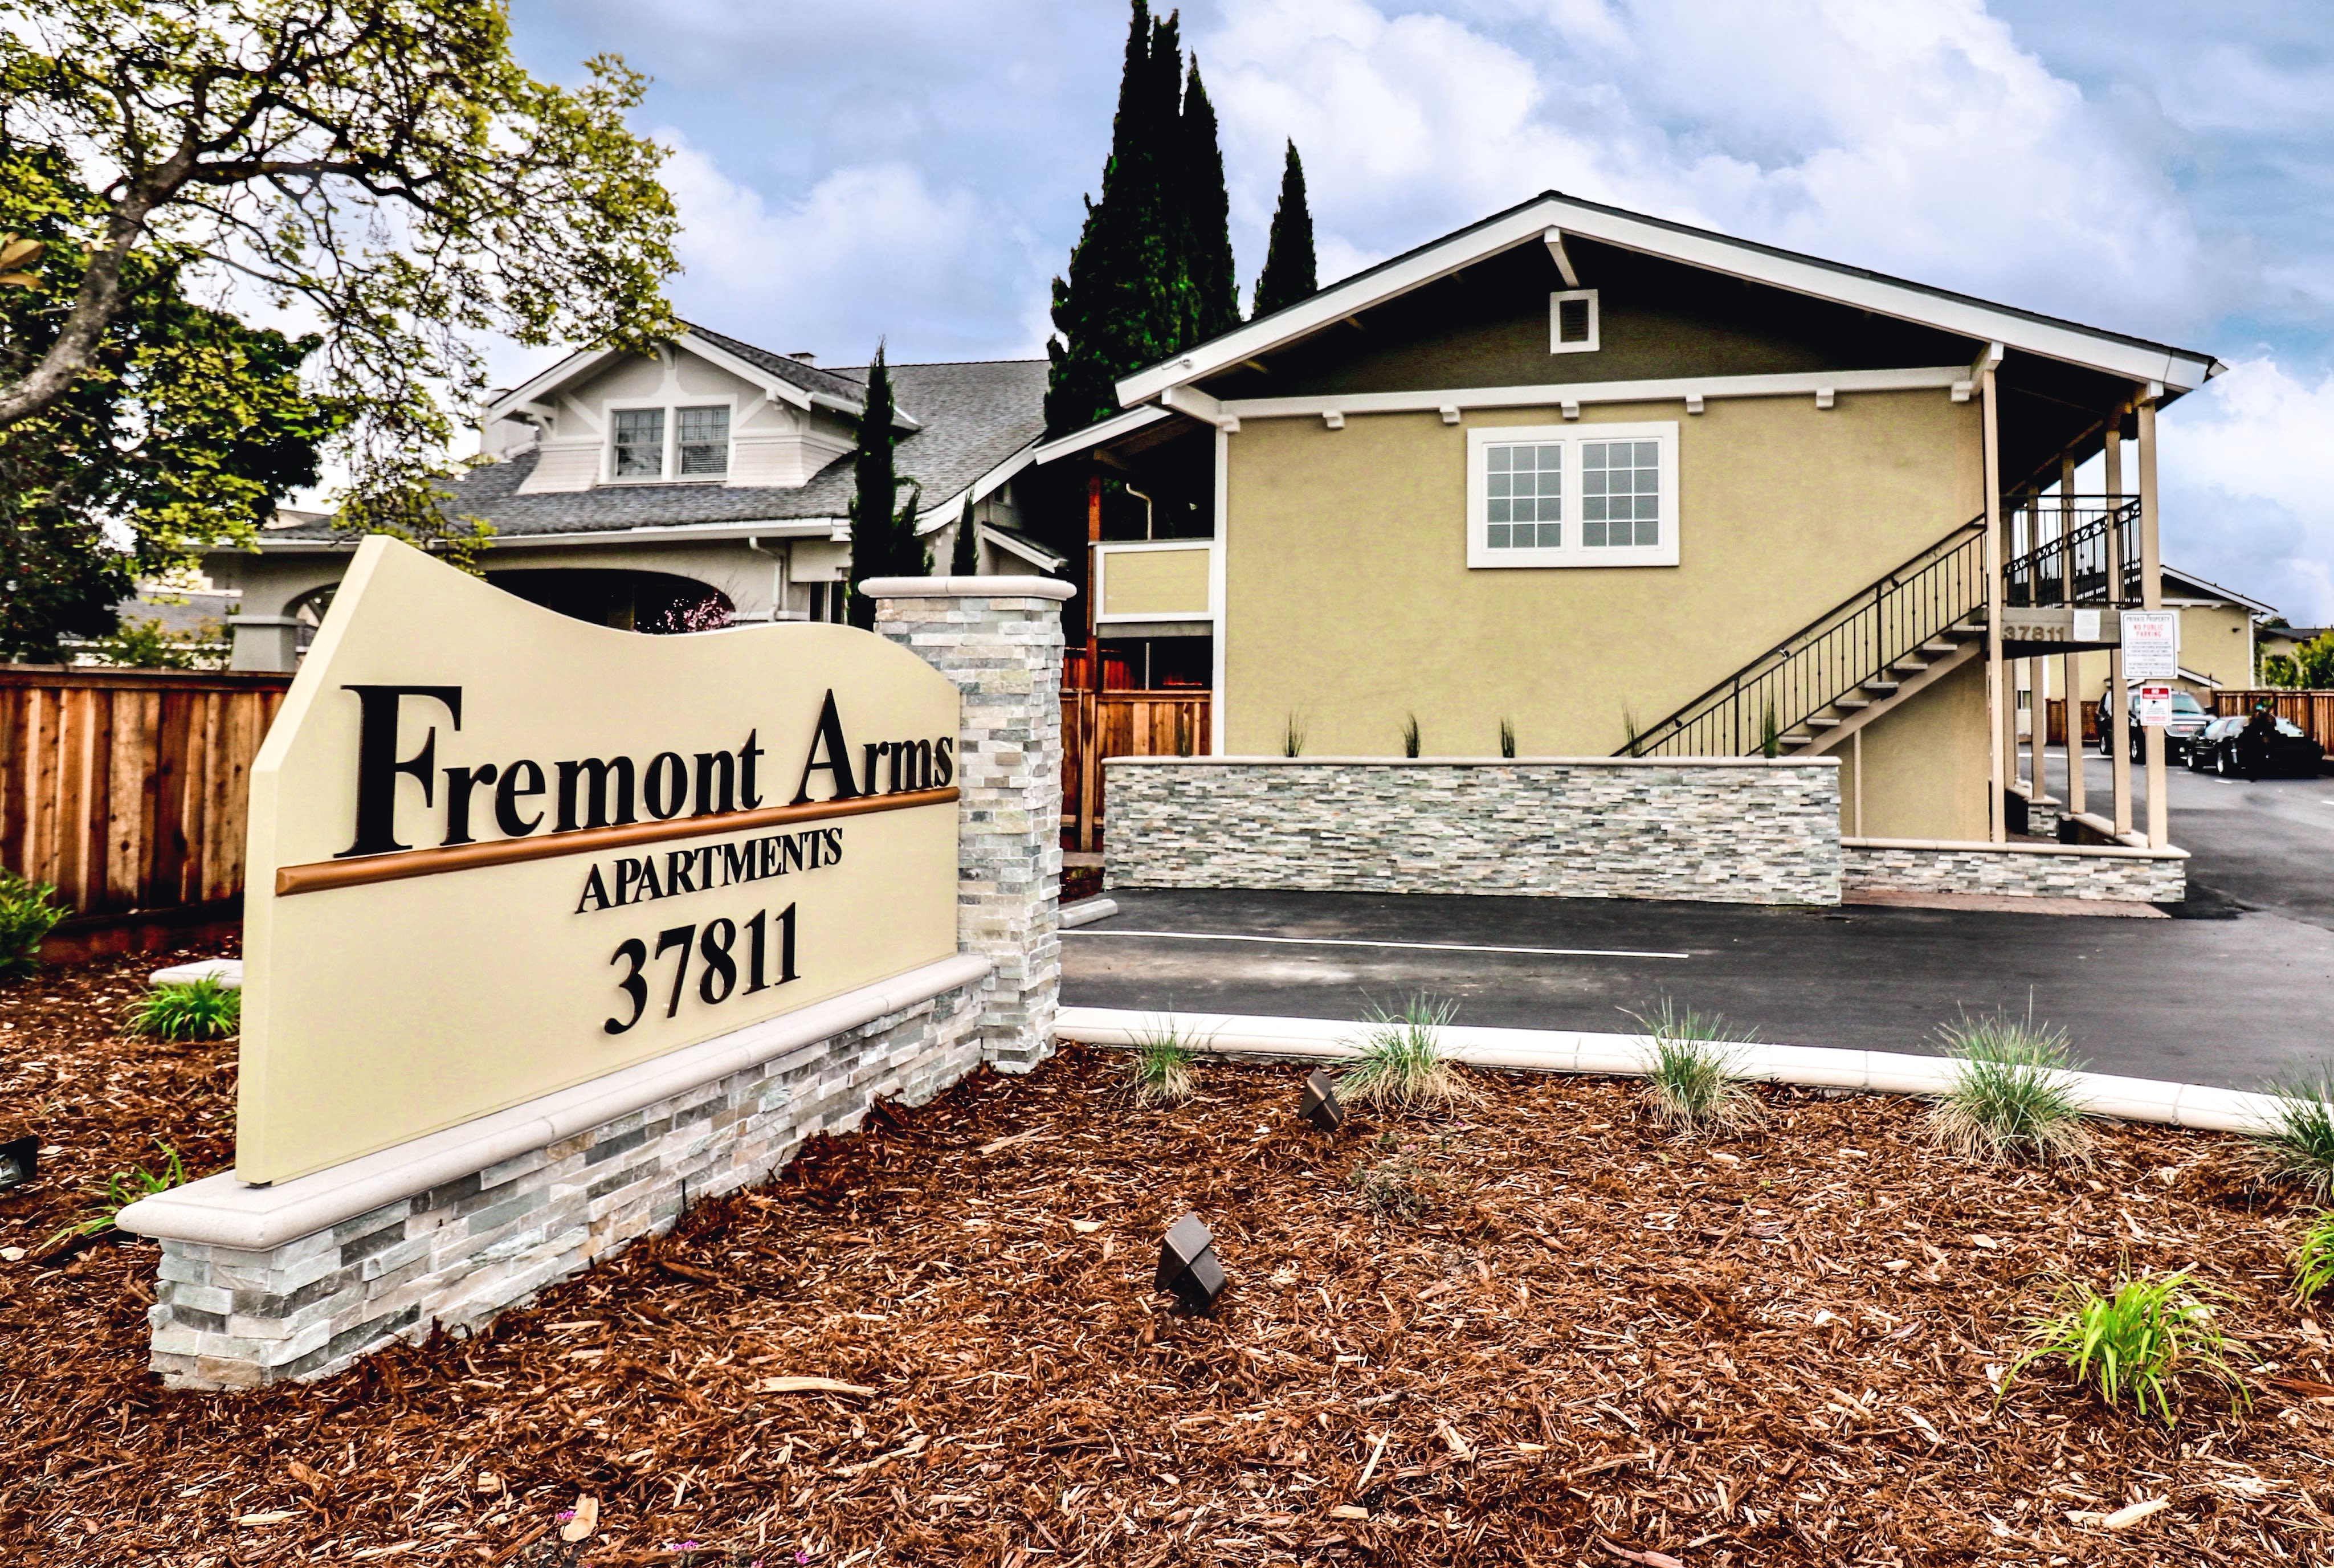 Neighborhood at Fremont Arms Apartments in Fremont, California